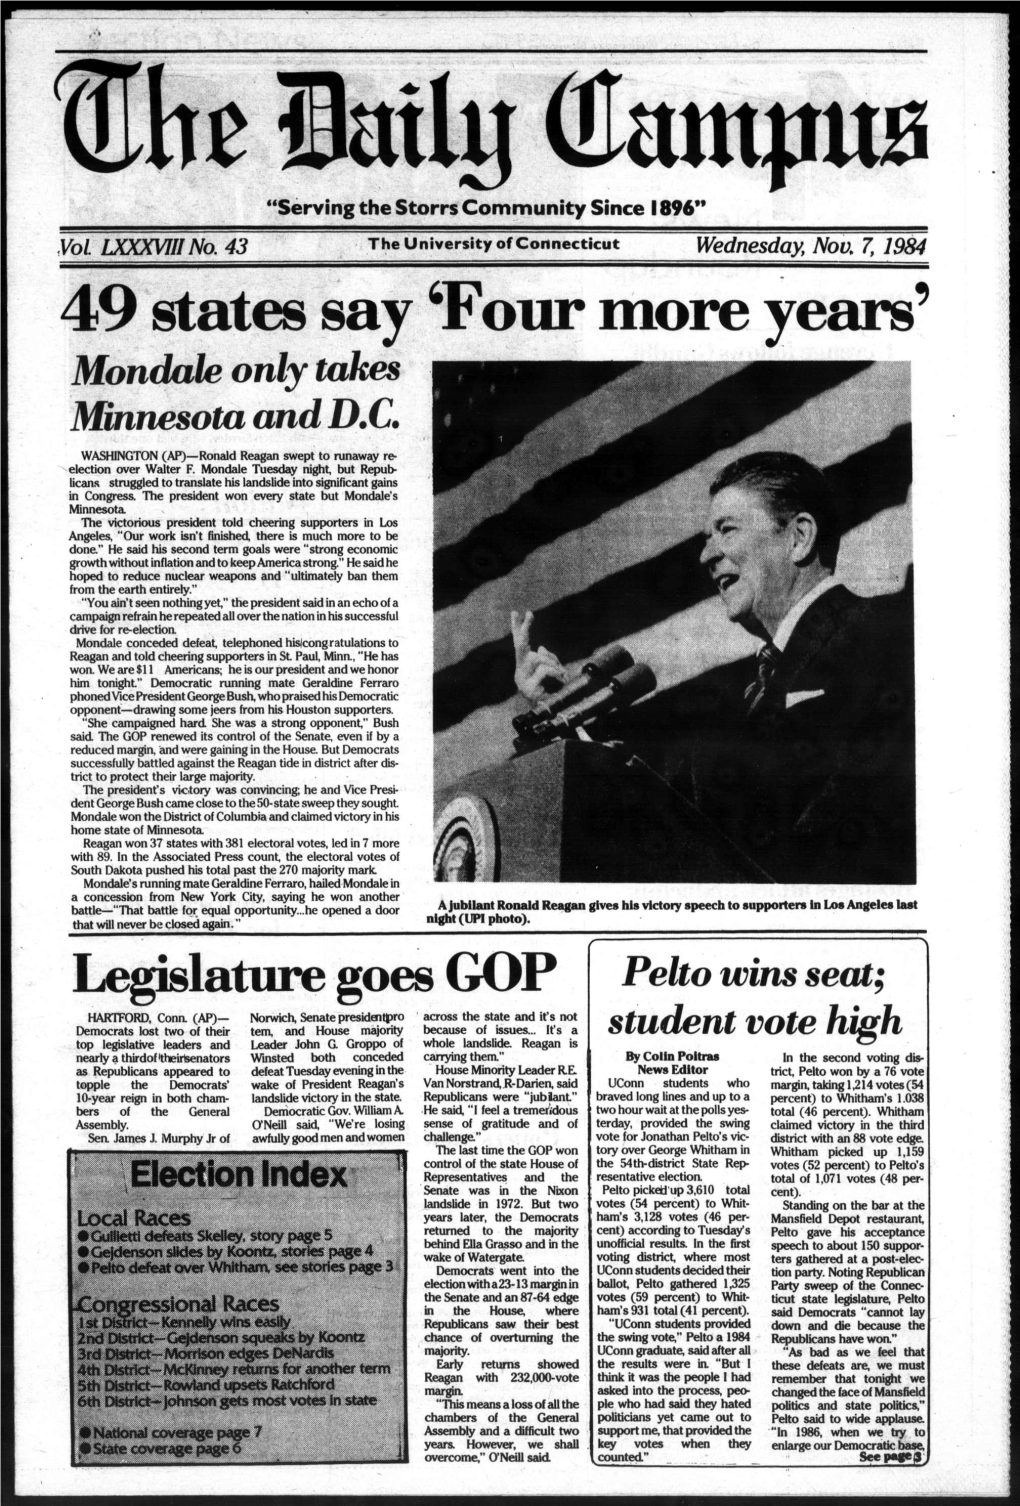 49 States Say Tour More Years Mondale Only Takes Minnesota and D.C, WASHINGTON (AP)—Ronald Reagan Swept to Runaway Re- Election Over Walter F